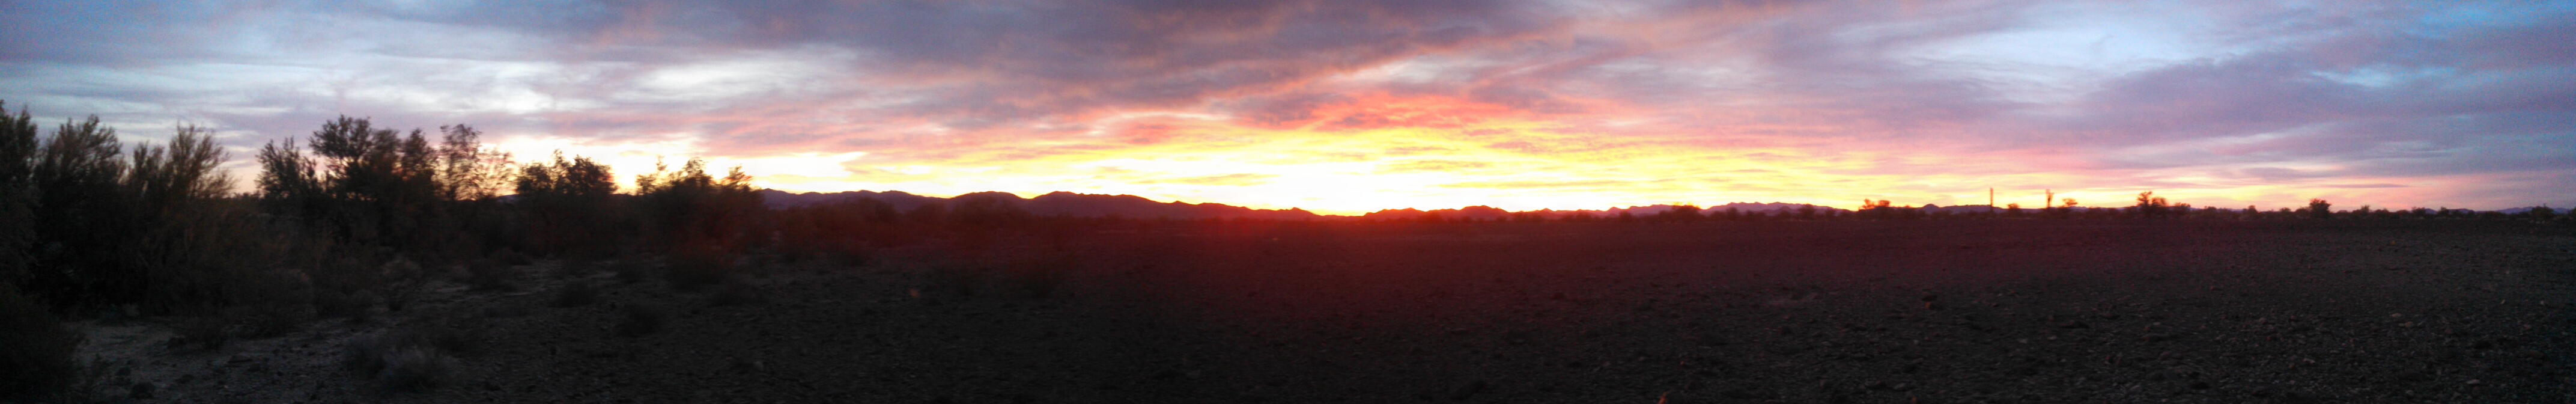 Another beautiful sunset in the desert